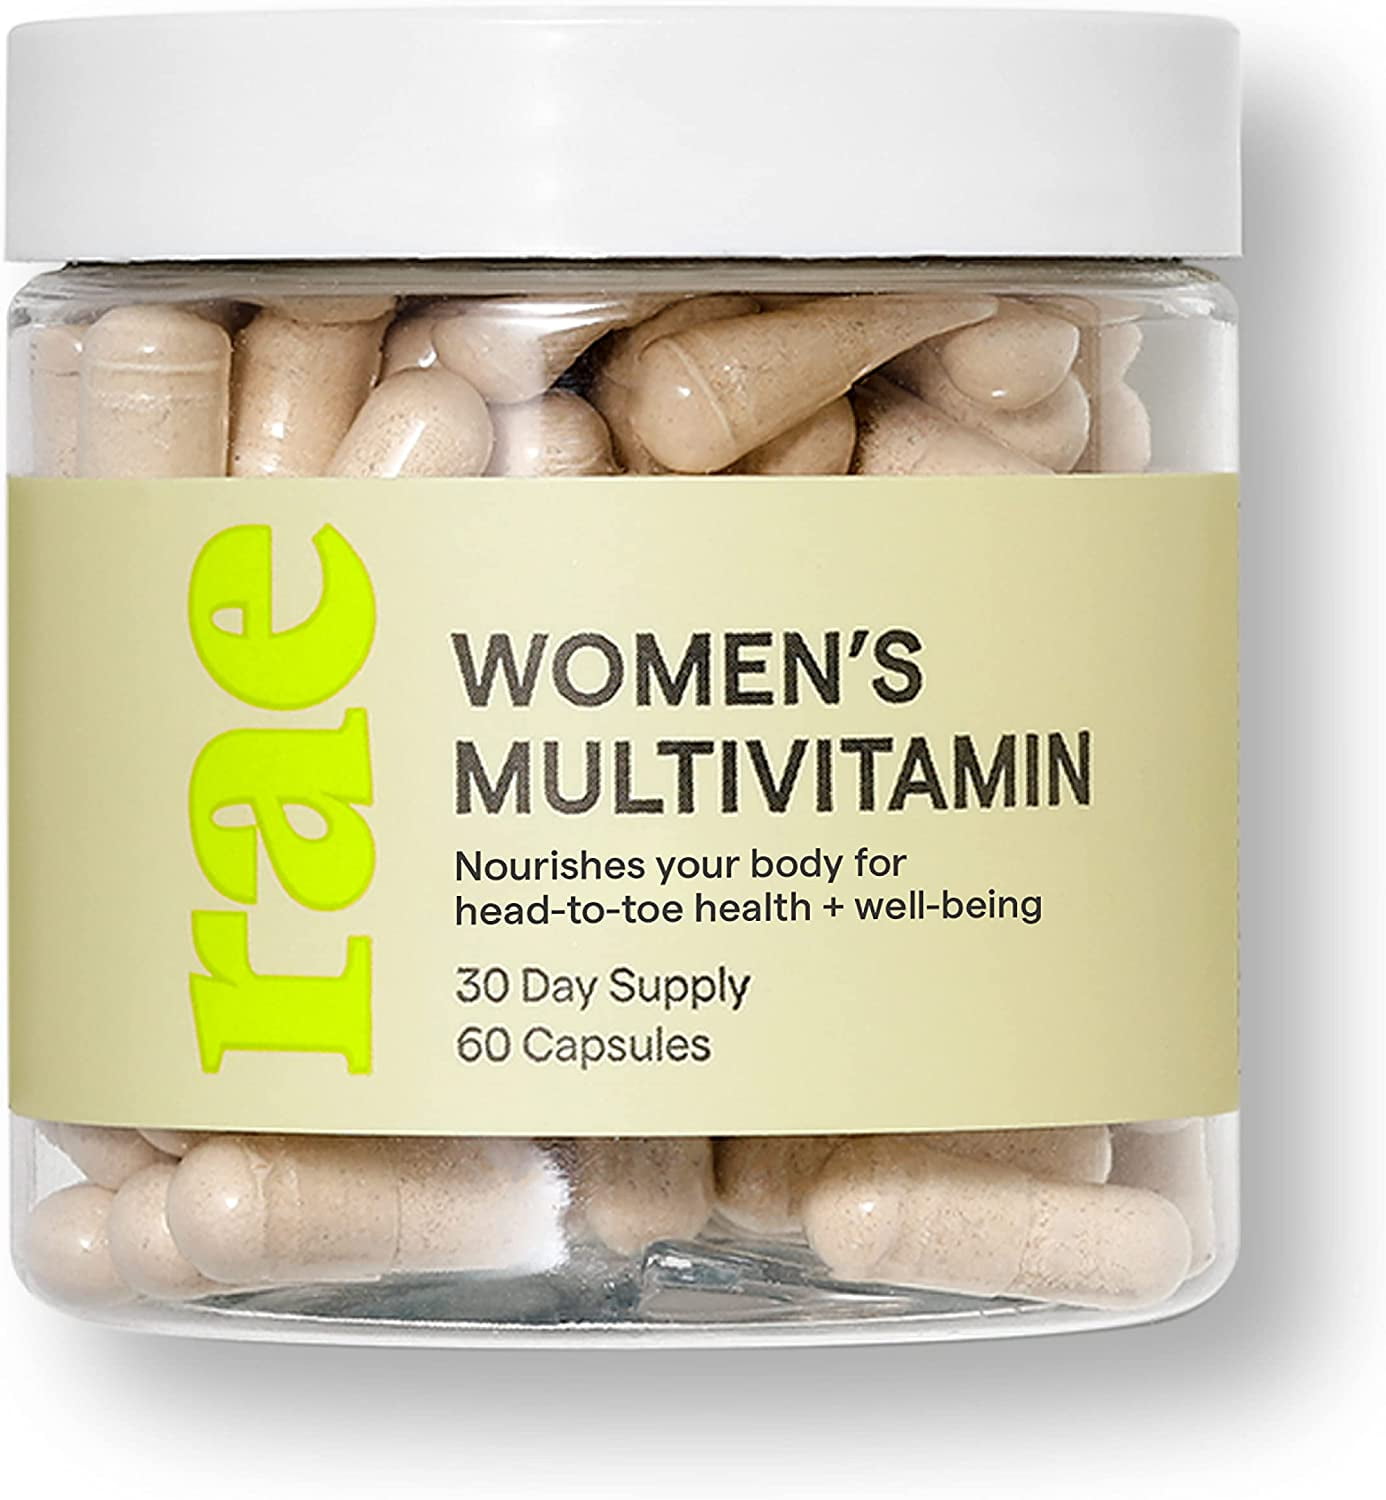 Rae Wellness Multivitamin Supplement with Vitamin A, C, and D, 60 Capsules